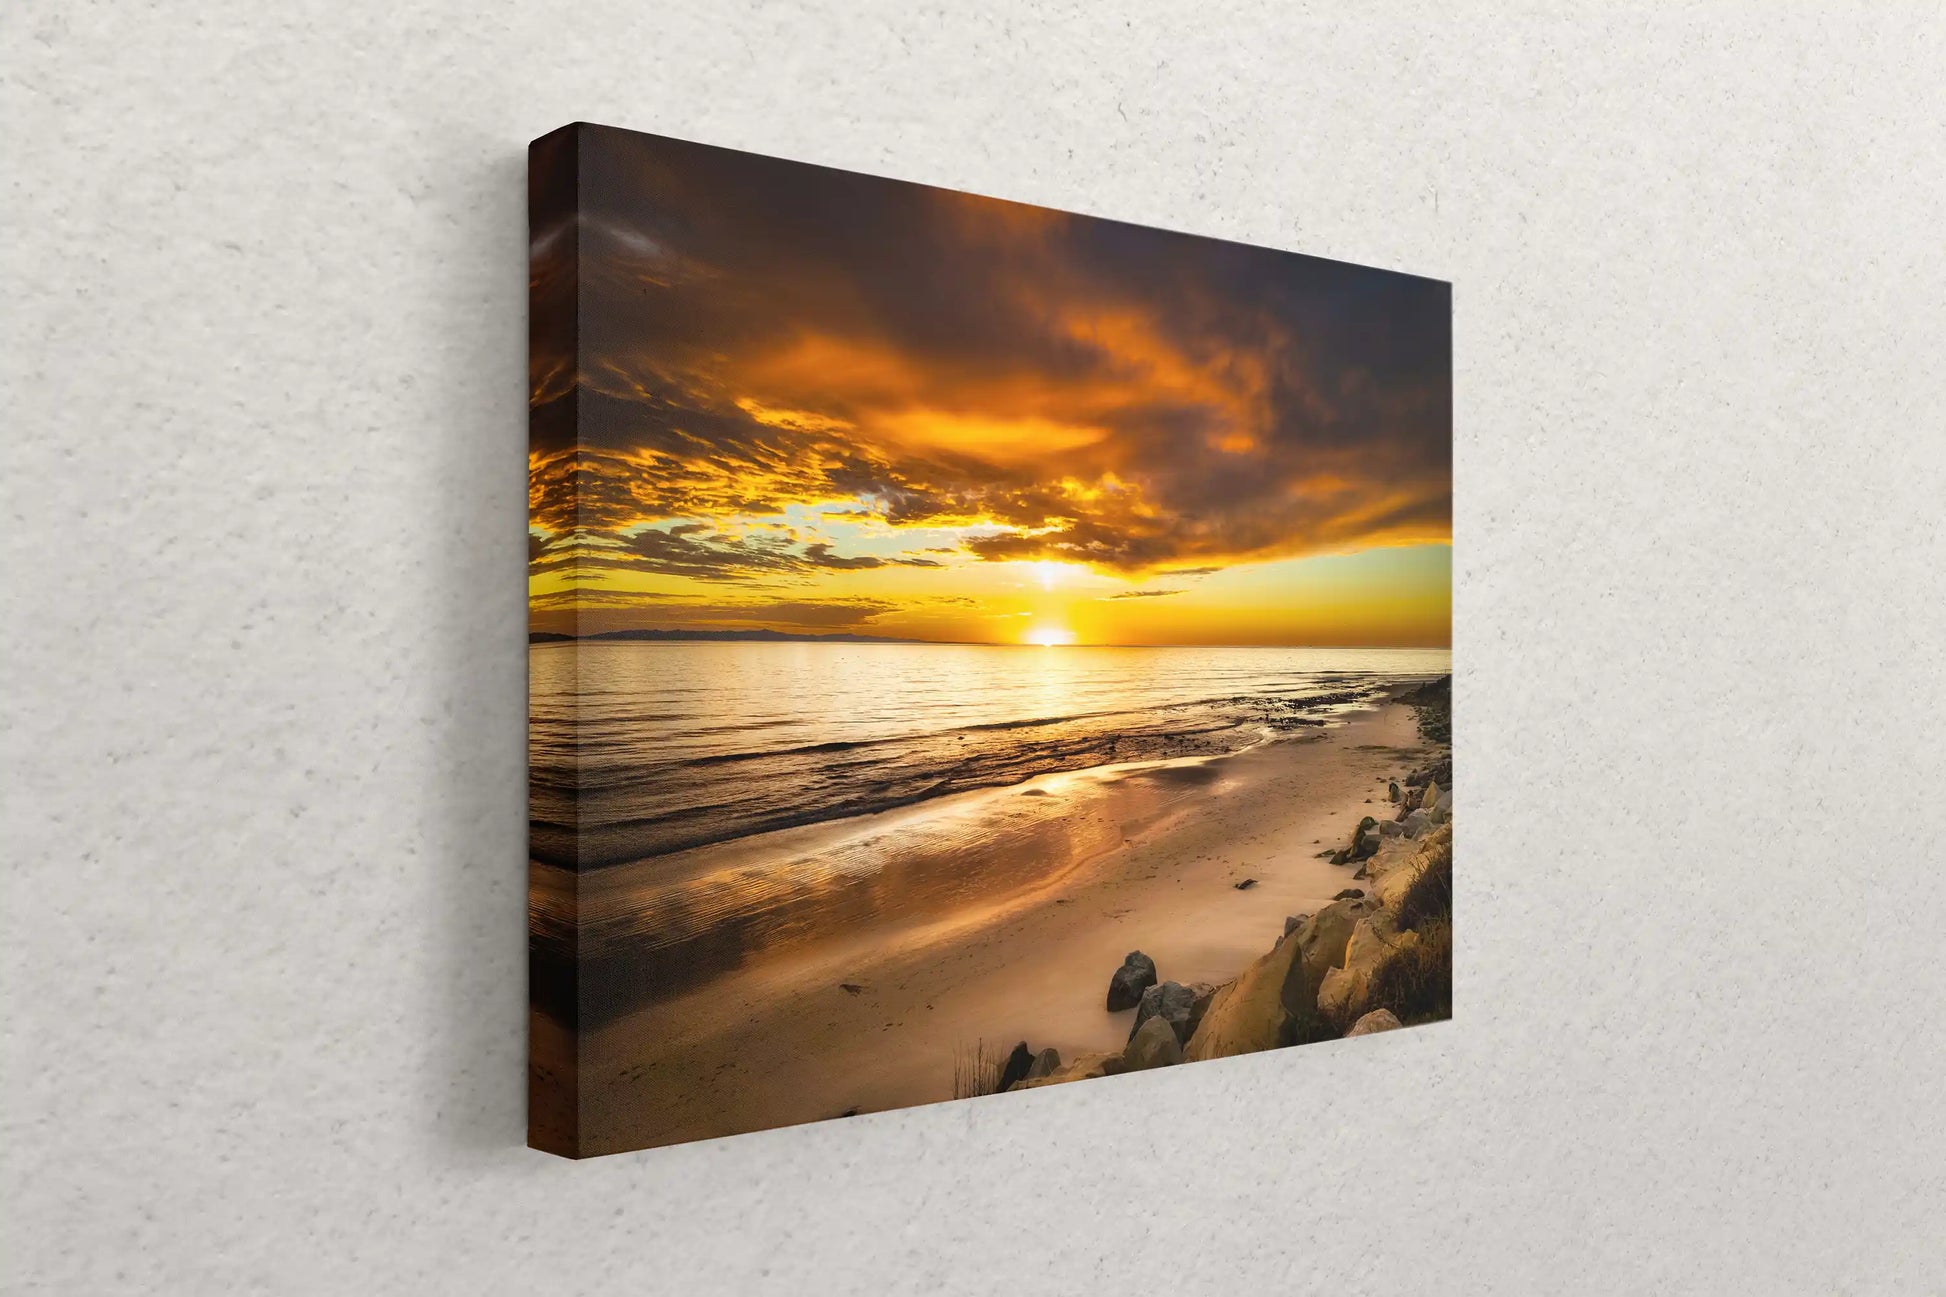 Side view of a canvas wall art featuring a breathtaking Hobson Beach sunset, the image wrapping around the edges for a continuous display of nature.